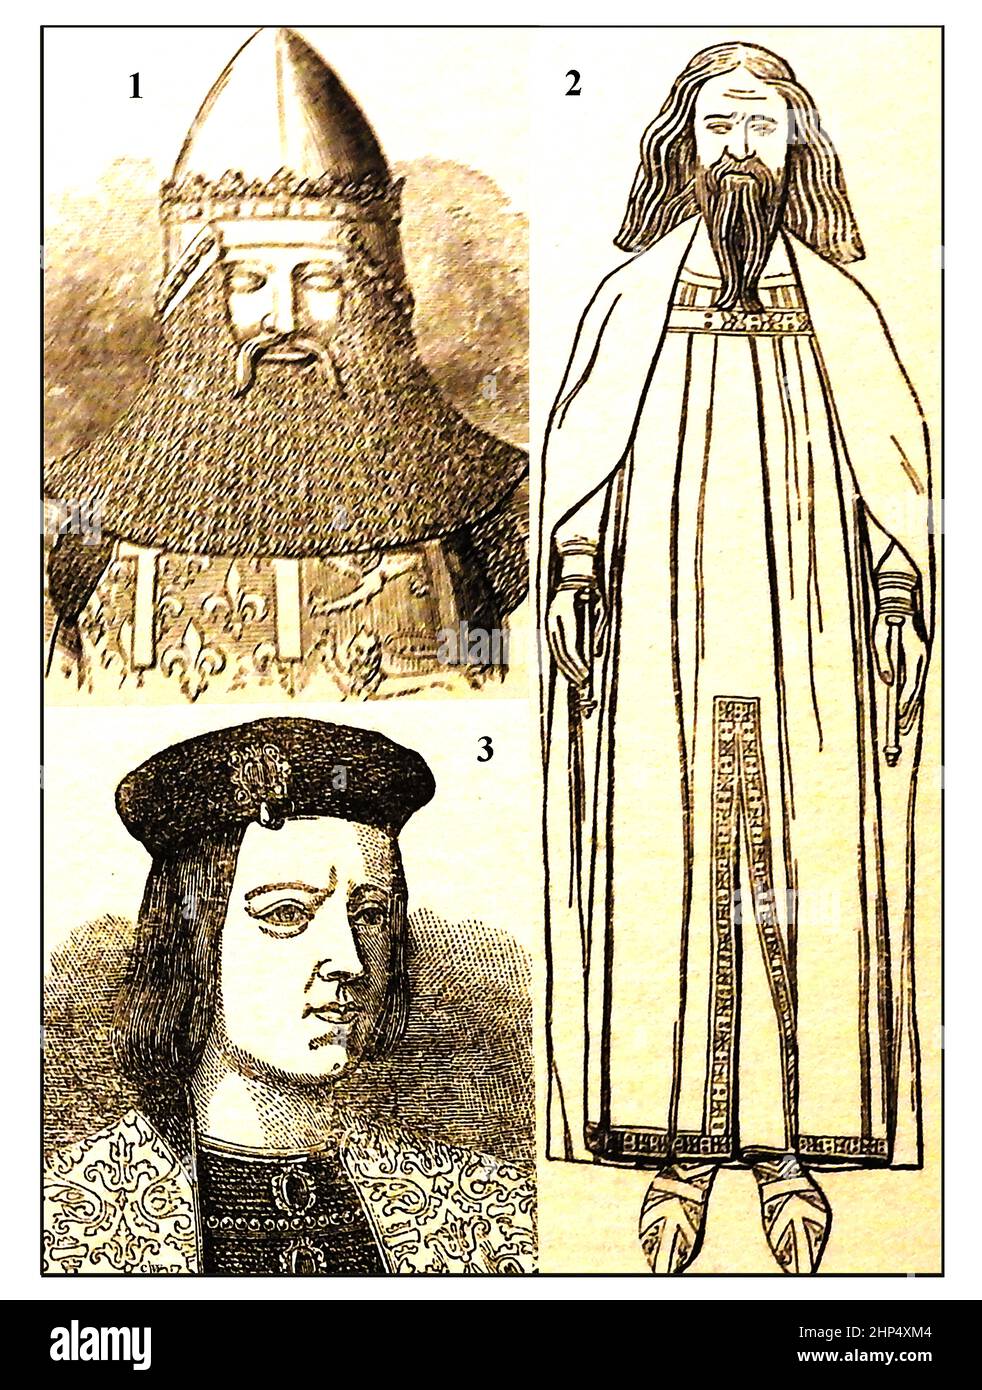 BRITISH ROYALTY  - A  late 19th century engraving showing portraits  of  Edward the Black Prince (Edward of Woodstock 1330-1376), King Edward III and King Edward IV of England. Stock Photo